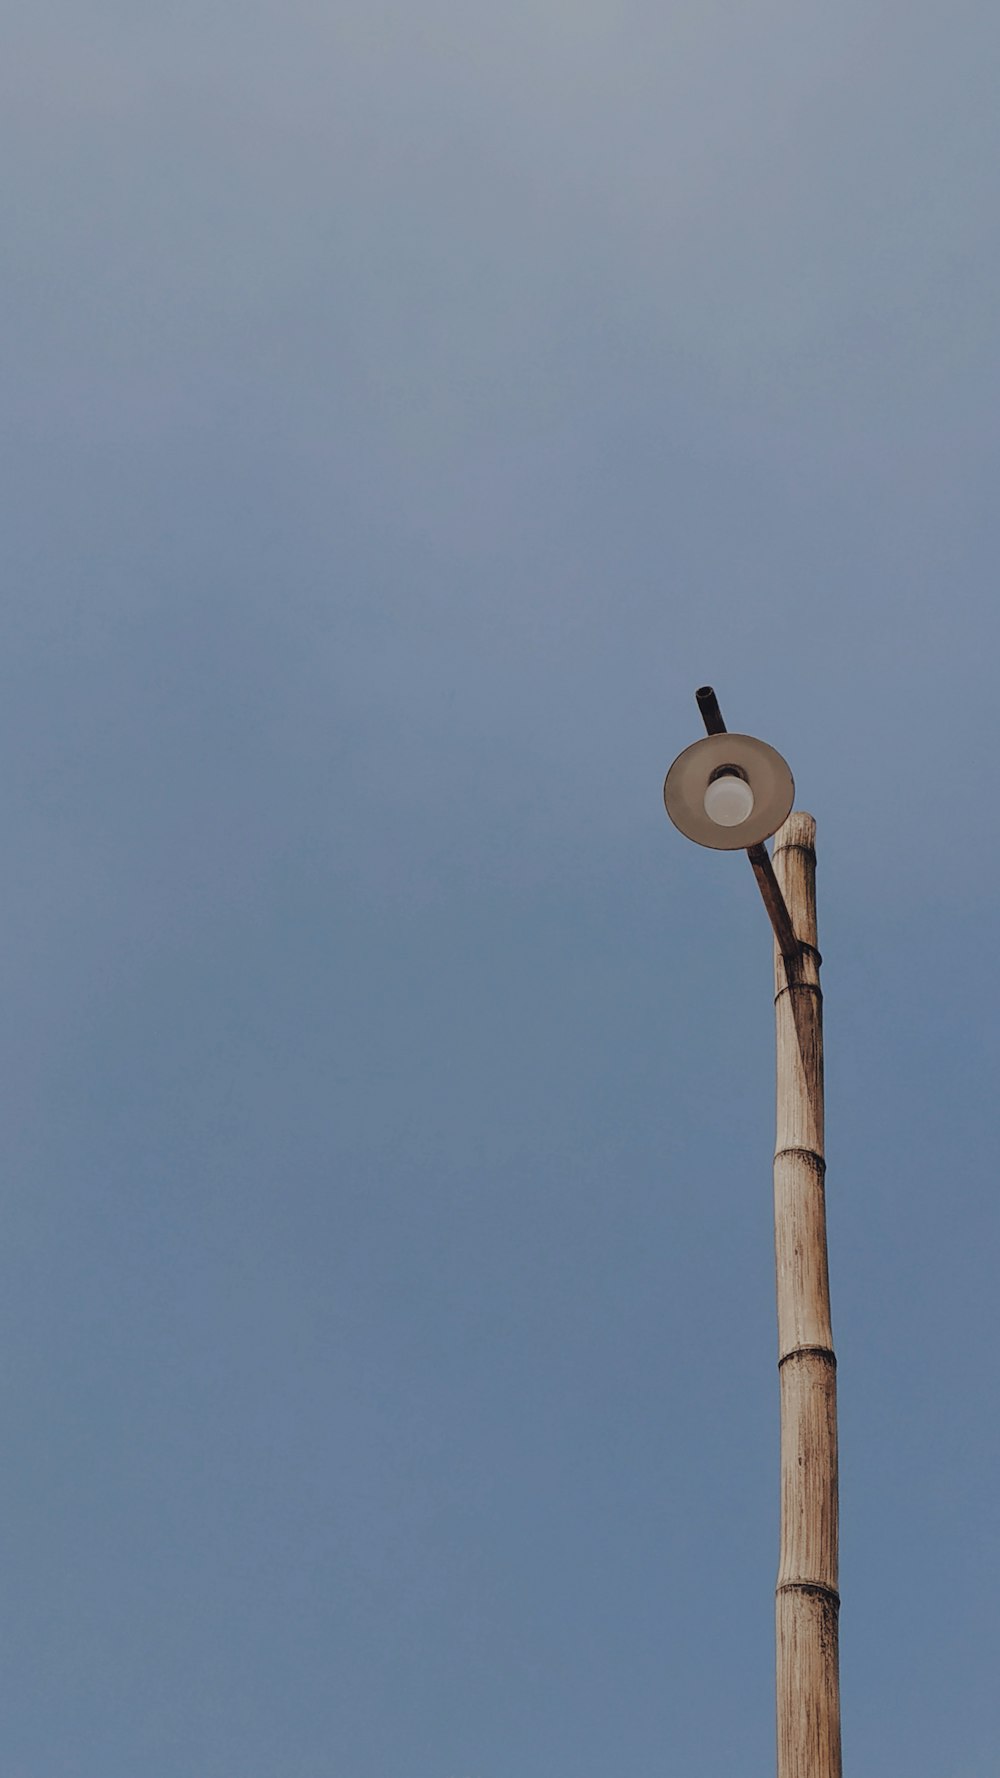 brown wooden post with white round light during daytime